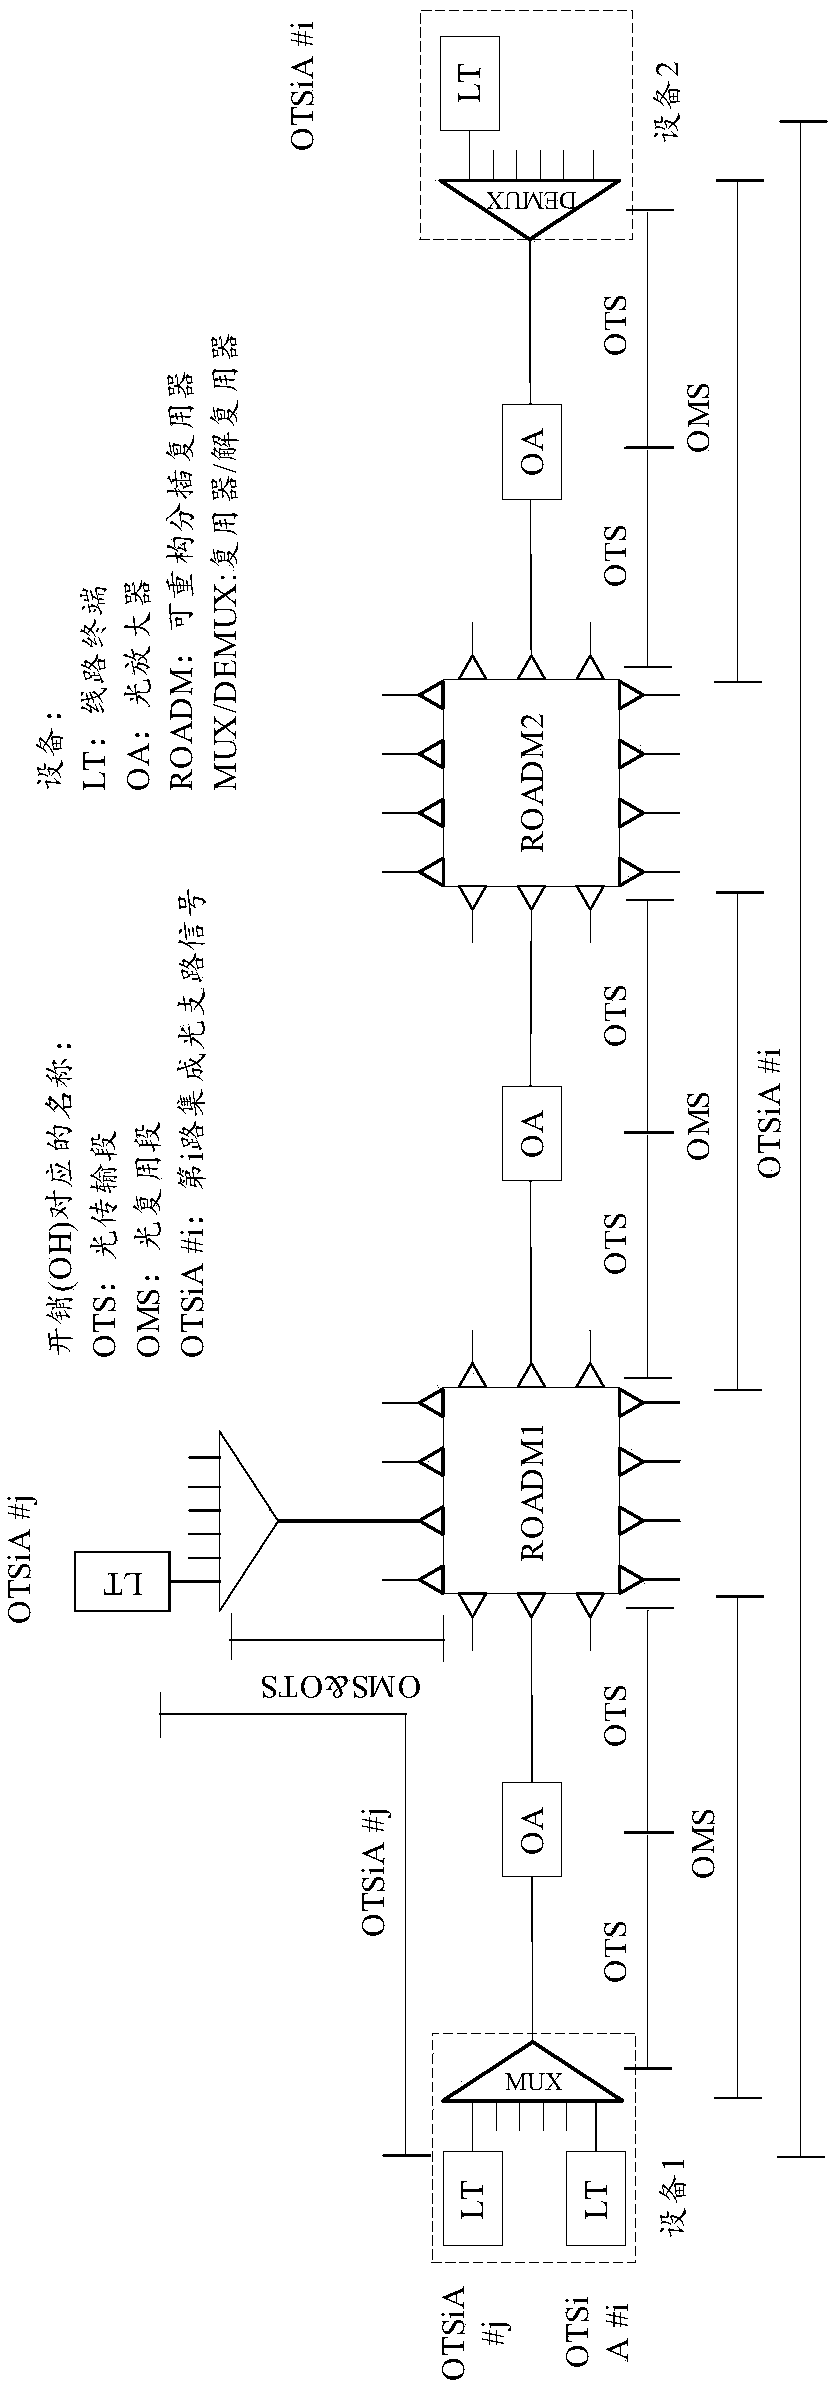 A method and apparatus for optical monitor channel processing in an optical network